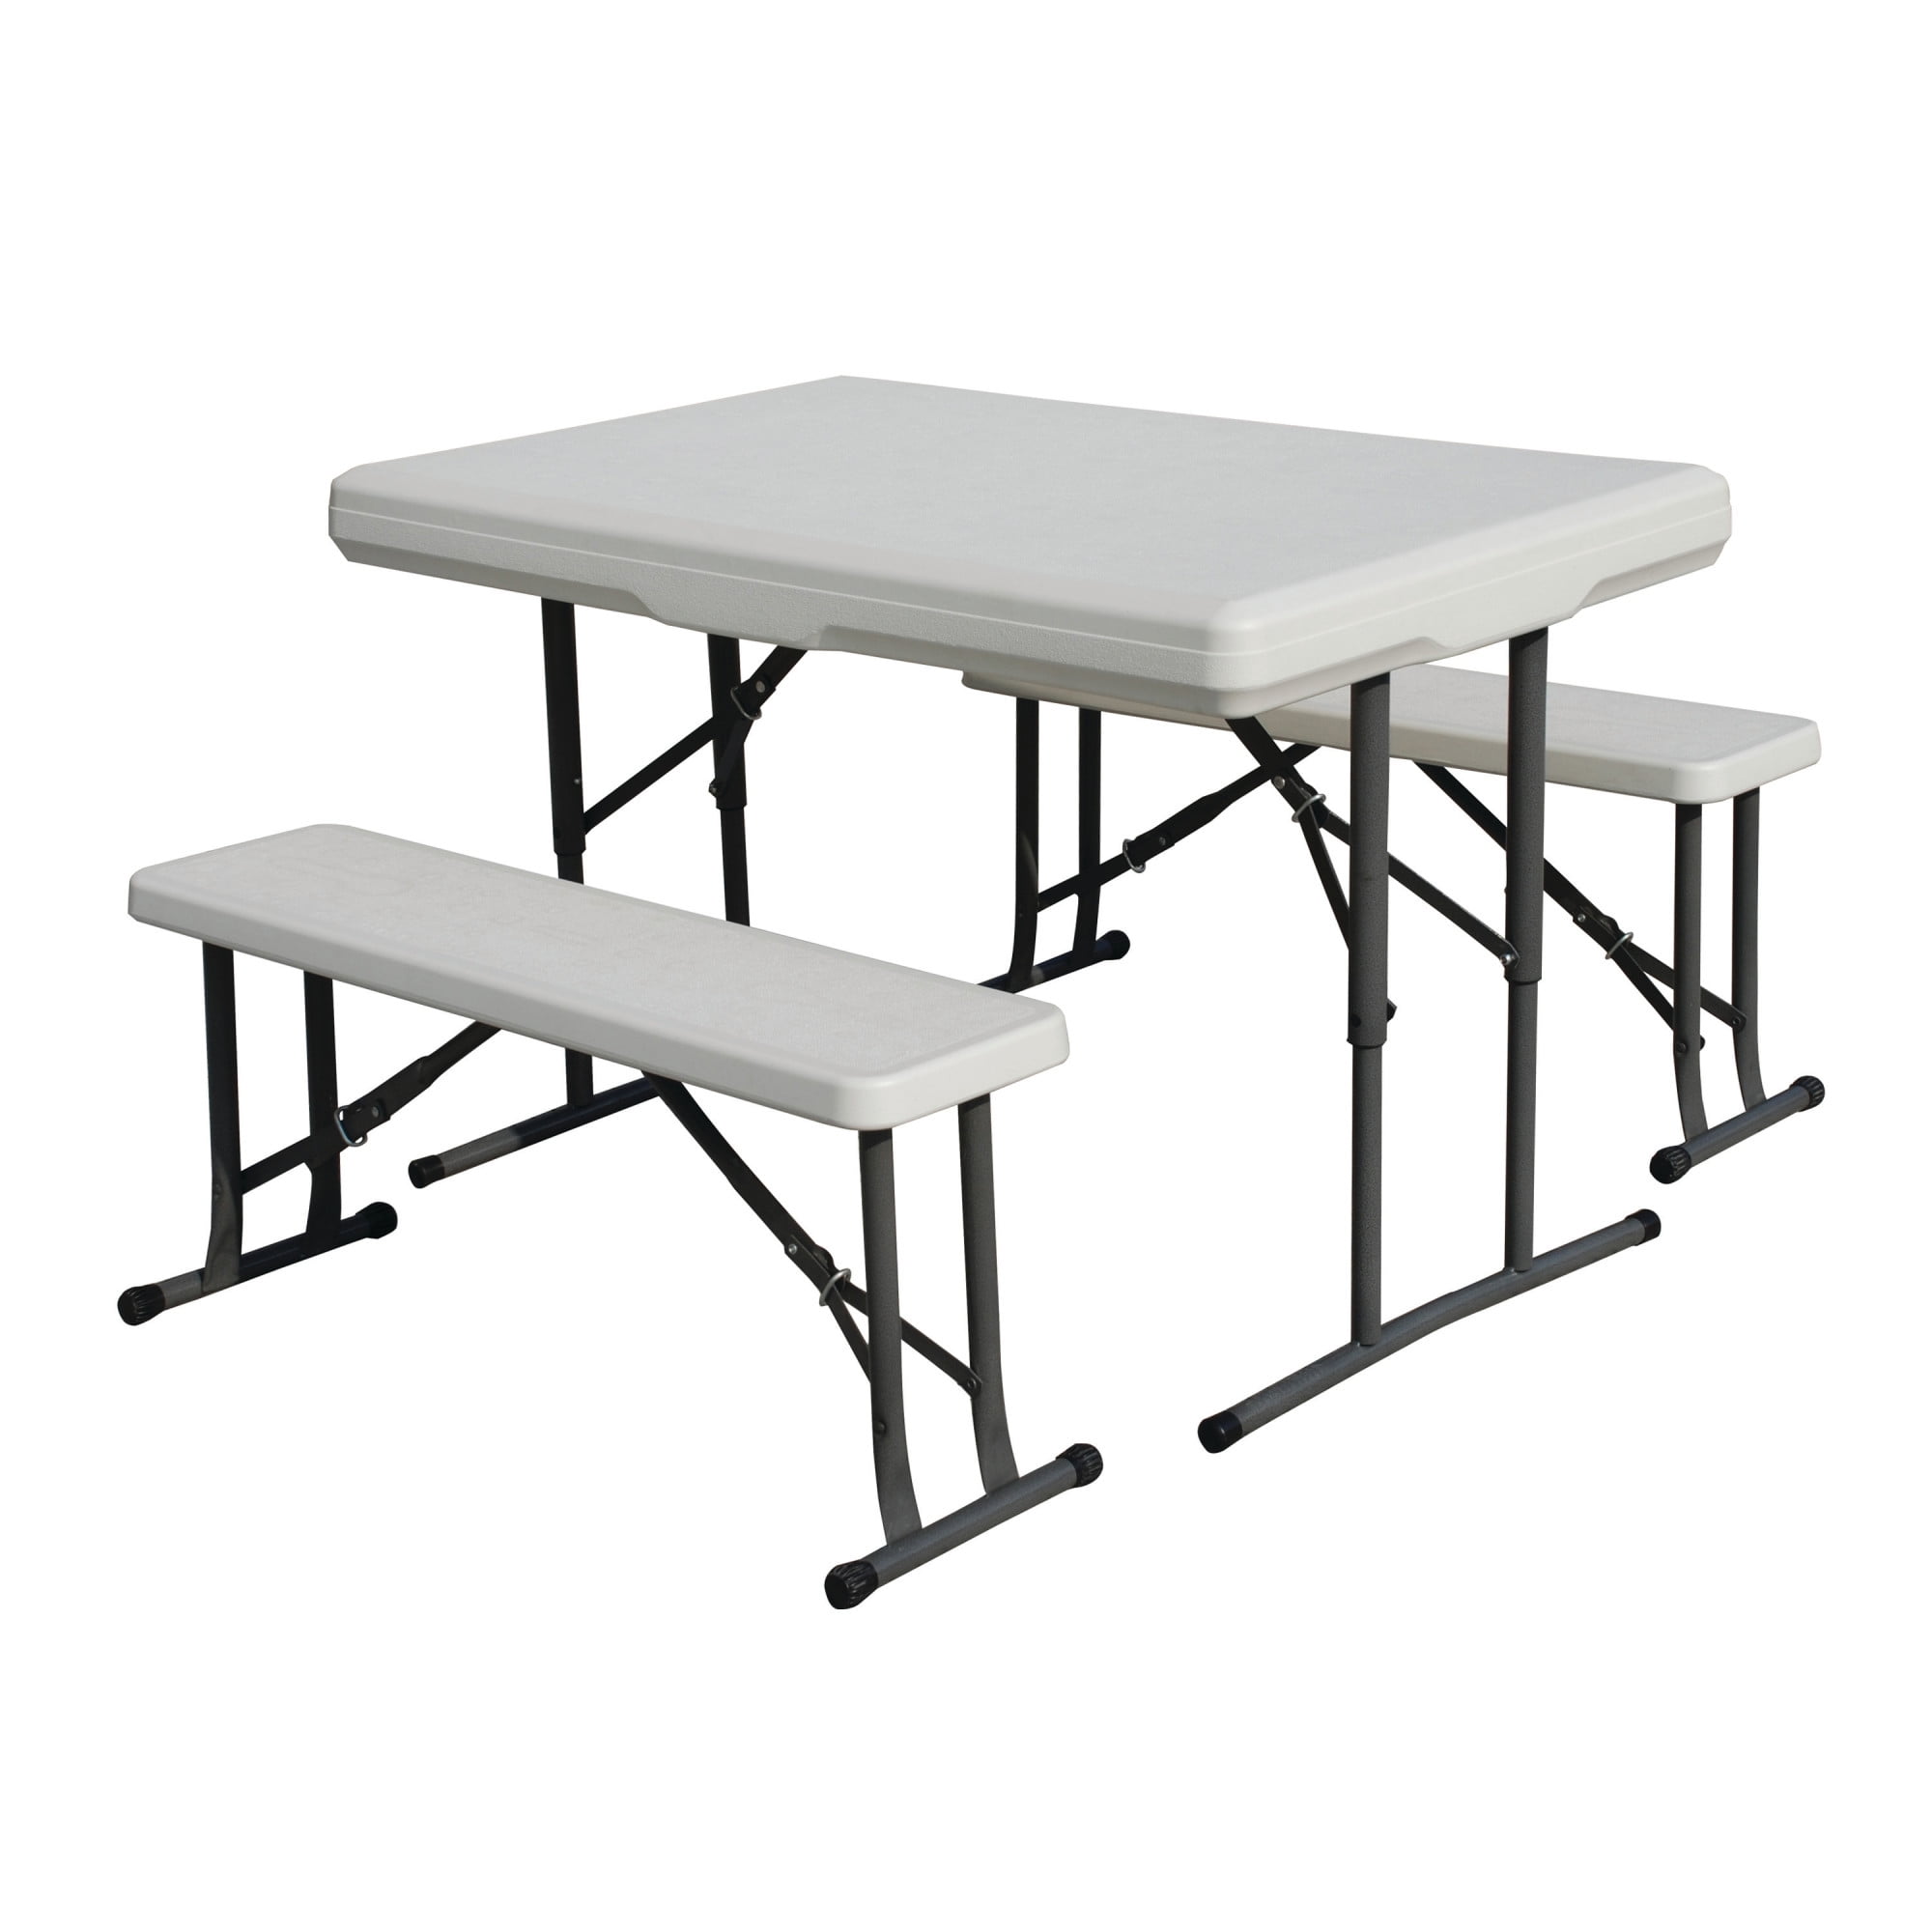 Outdoor Foldable Aluminum Picnic Table with Bench Seats robust and weatherproof 